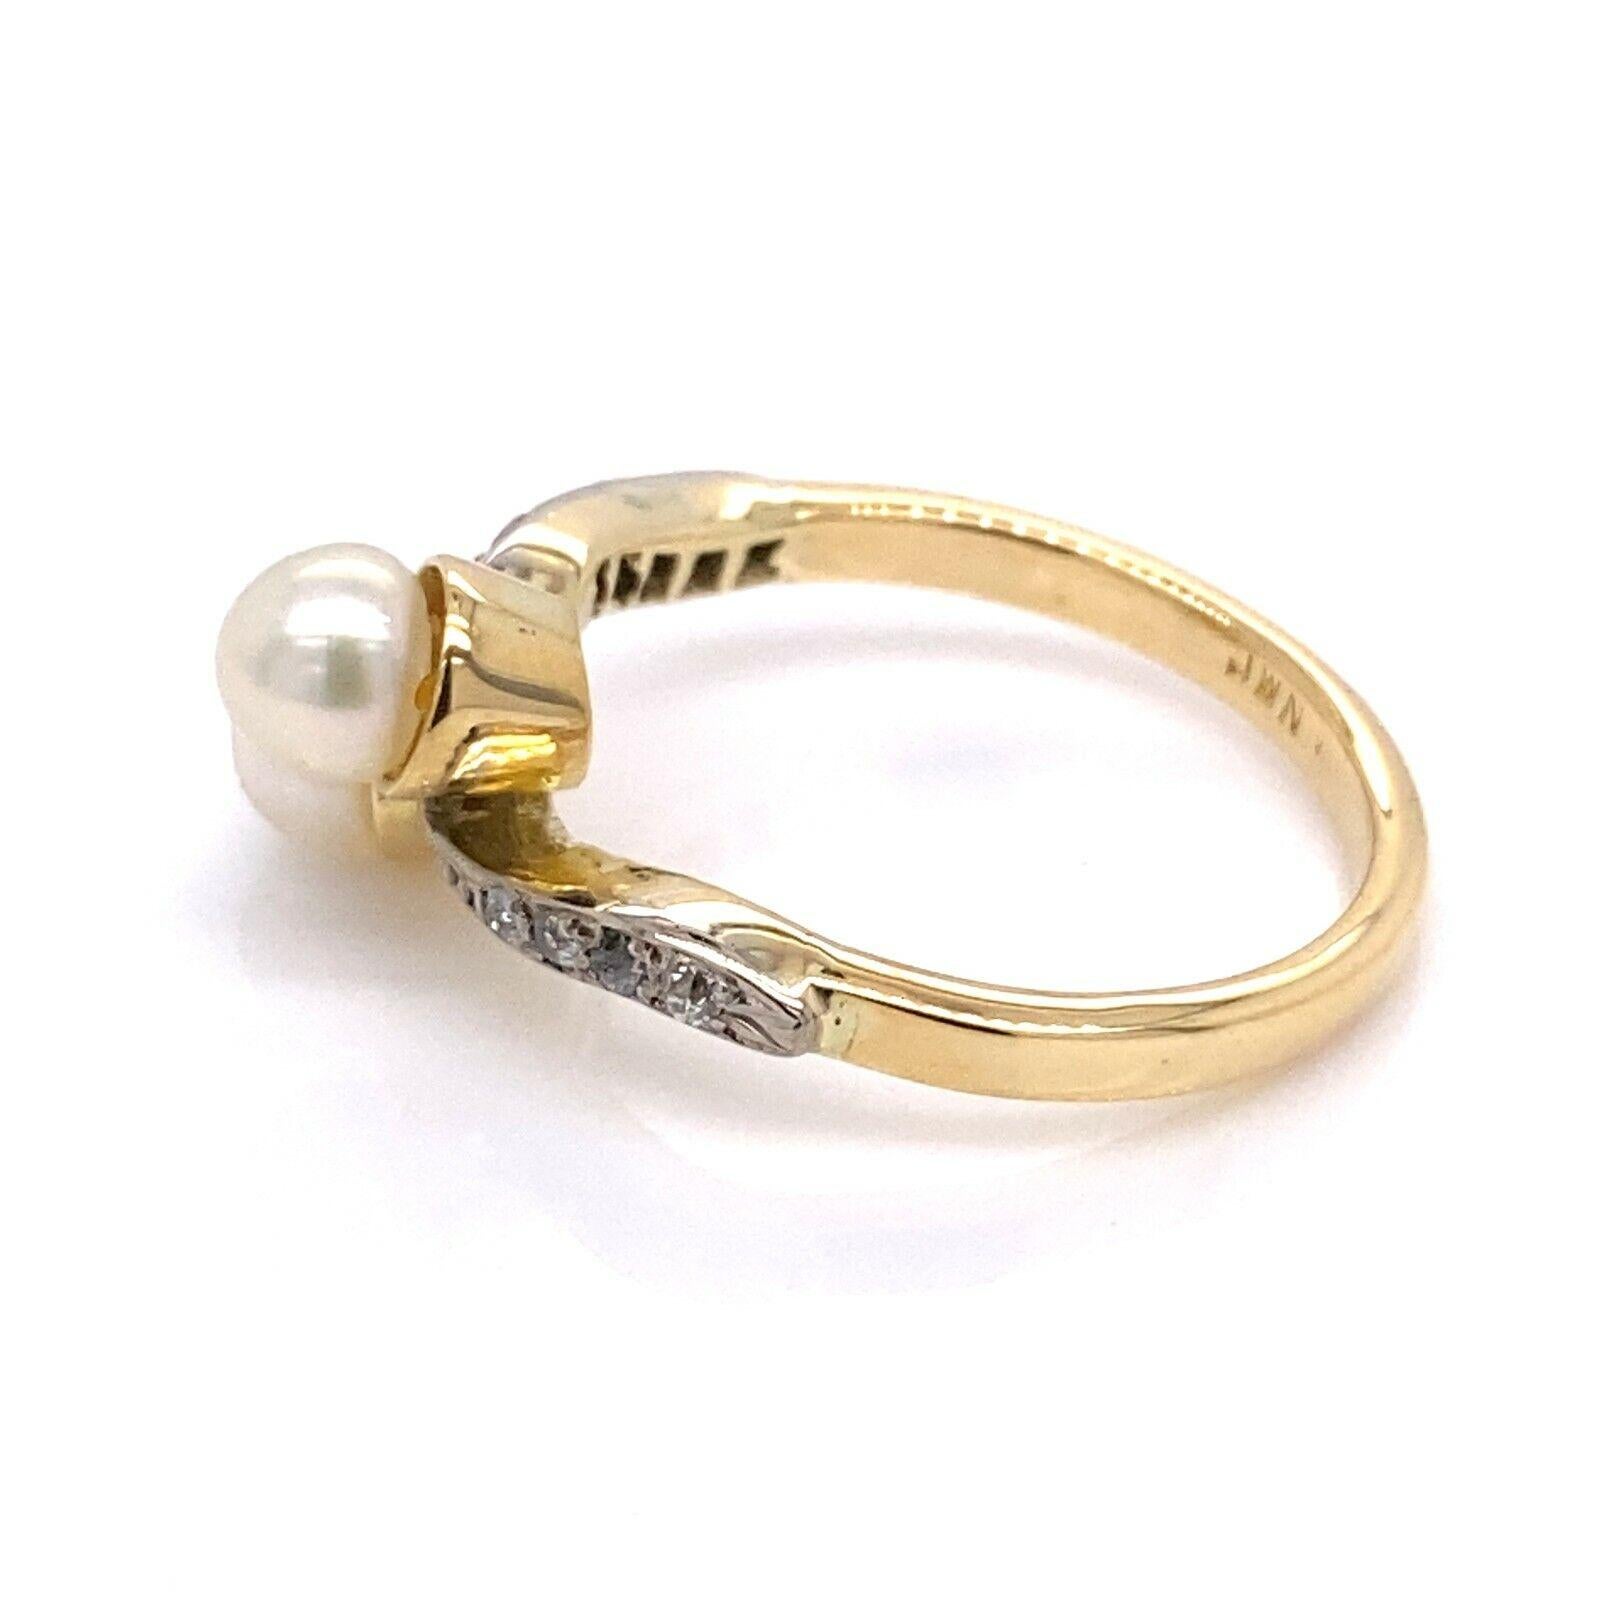 Vintage Cultured Pearl and Diamond Crossover Ring, Set In 18ct Yellow Gold Set with 0.08ct of Diamonds(4 Victorian Cut Diamonds on each Shoulder).

Additional Information:
Total Weight: 4.5g
Width of Head: 9mm
Length of Head: 21mm
Width of Band: